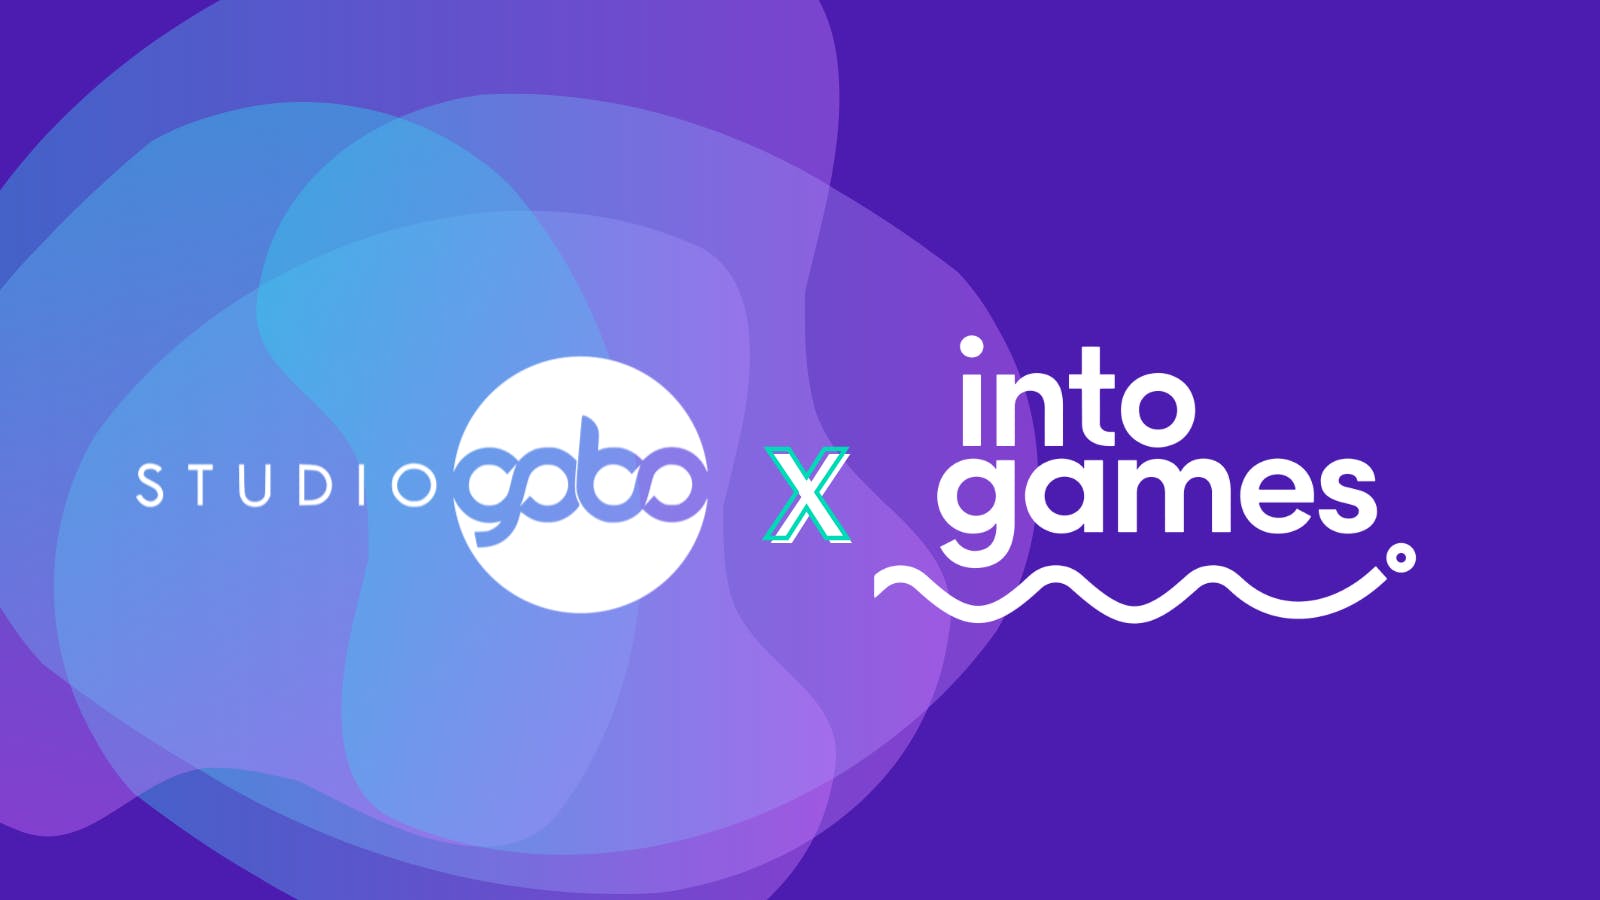 Studio Gobo are Into Games Partners